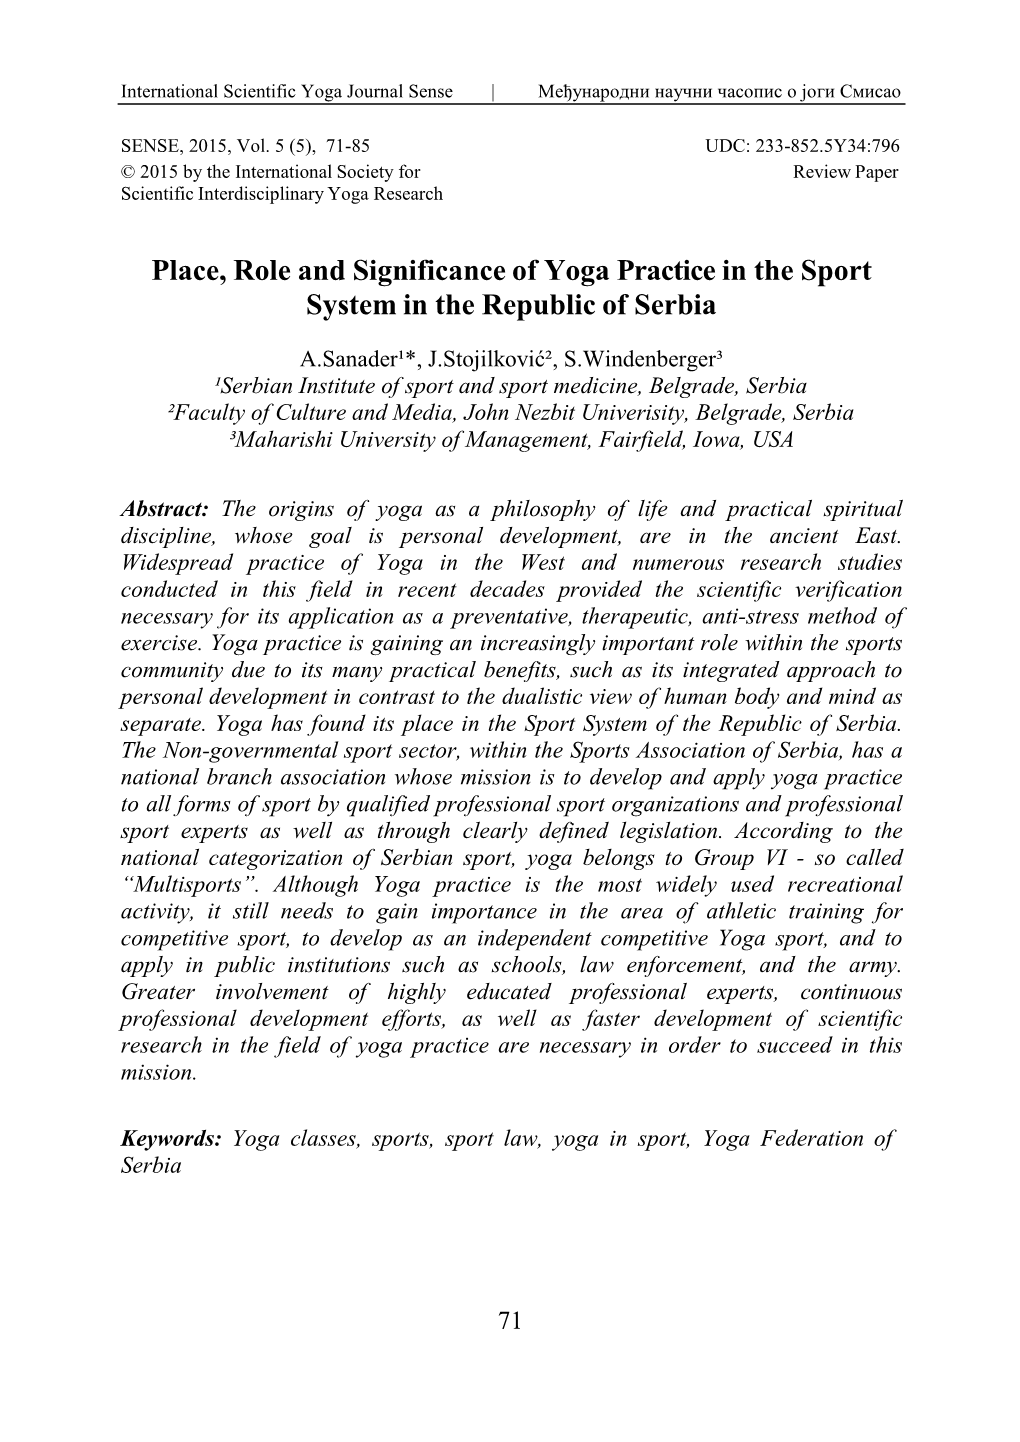 Place, Role and Significance of Yoga Practice in the Sport System in the Republic of Serbia